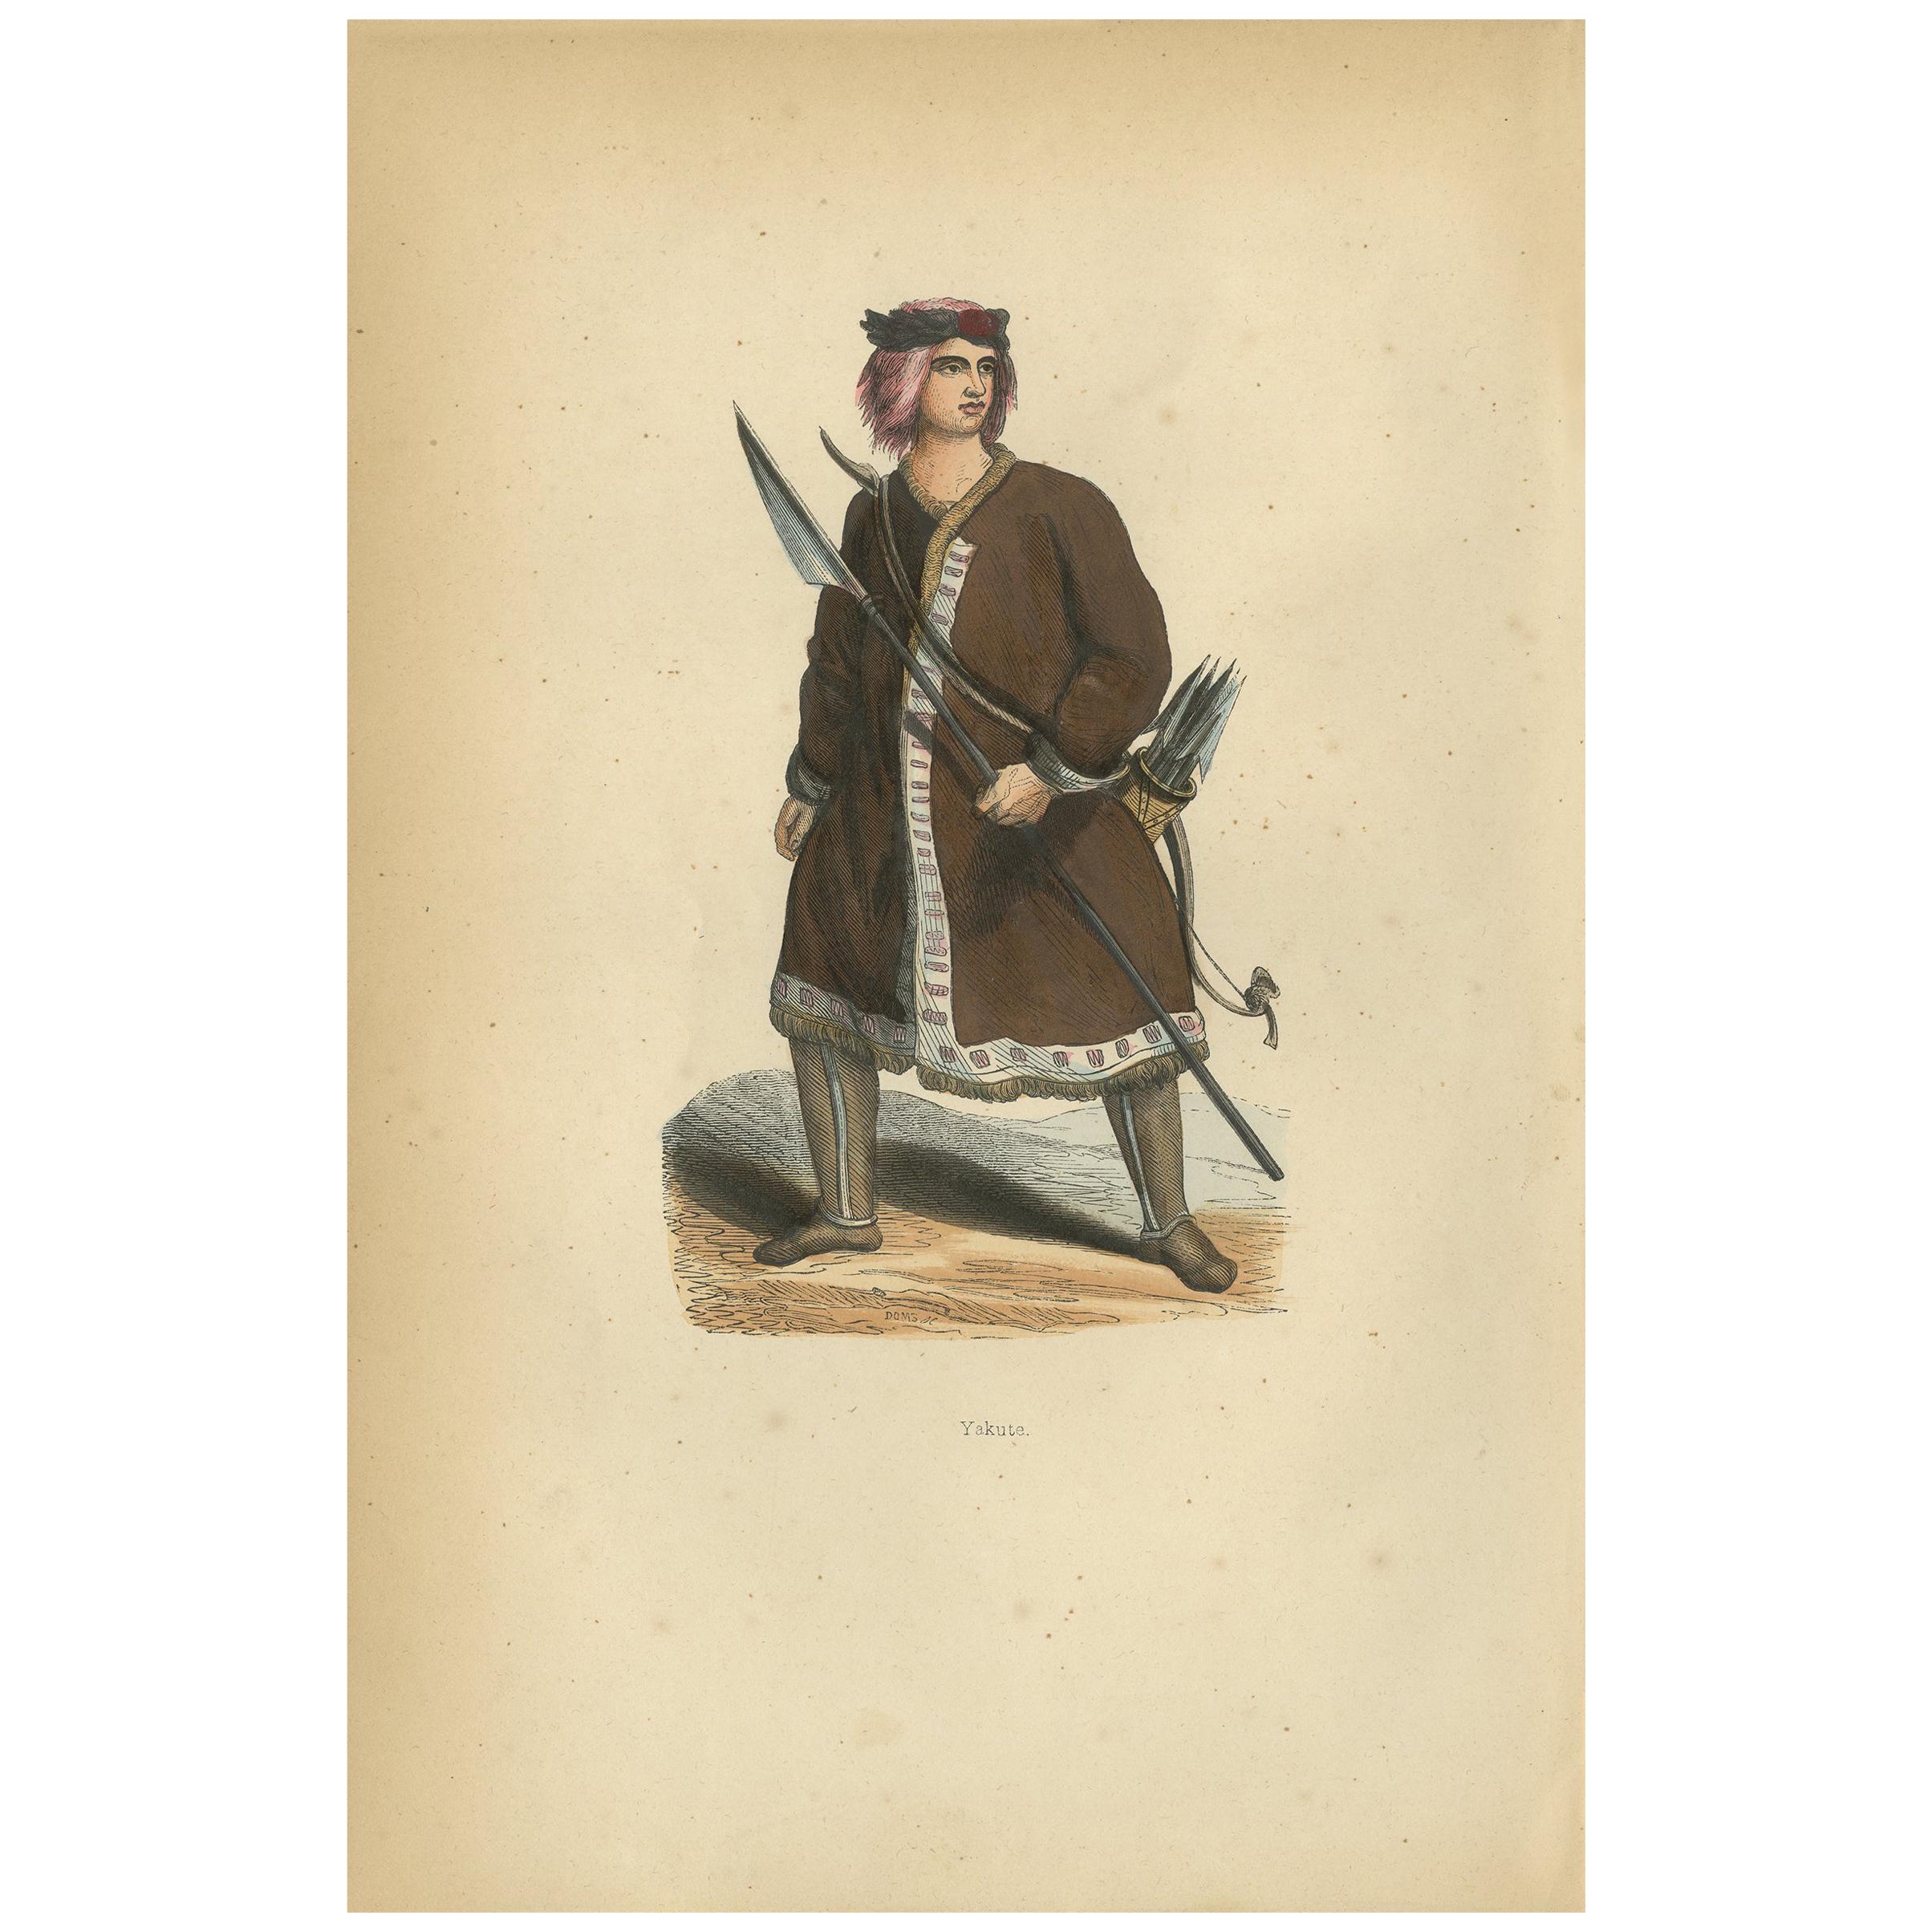 Antique Print of a Yakut by Wahlen, '1843'